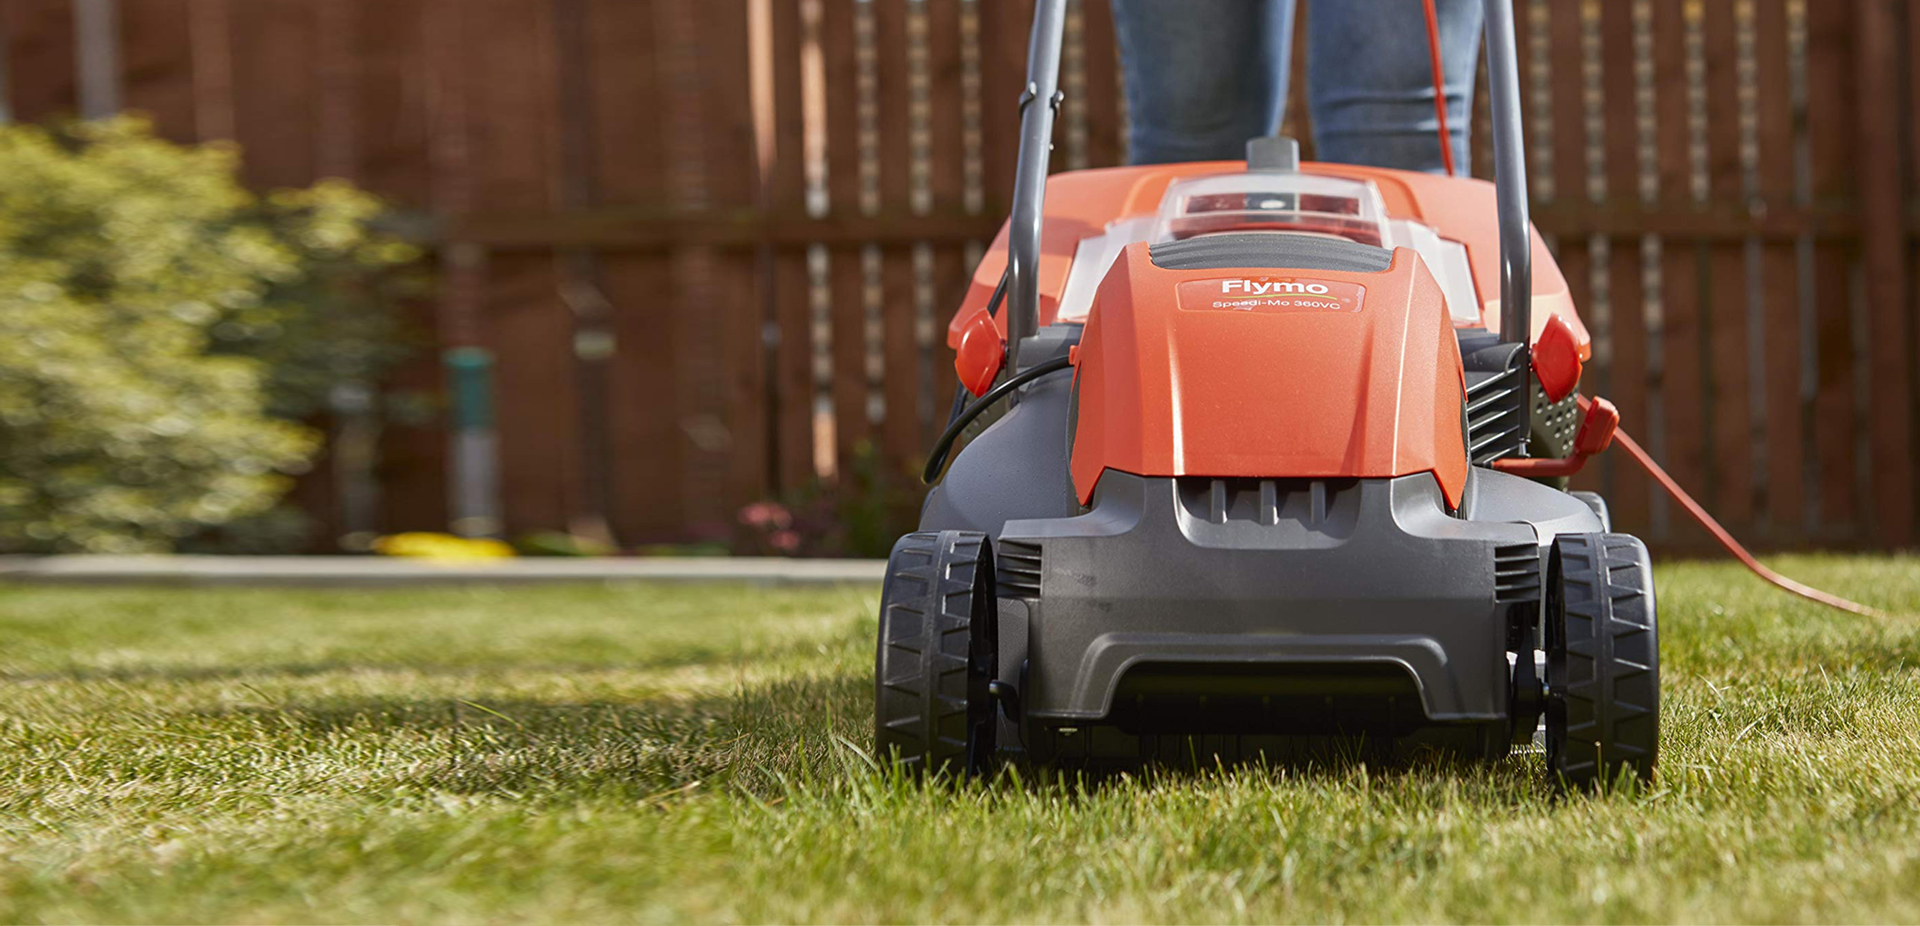 Lawnmowers & Trimmers